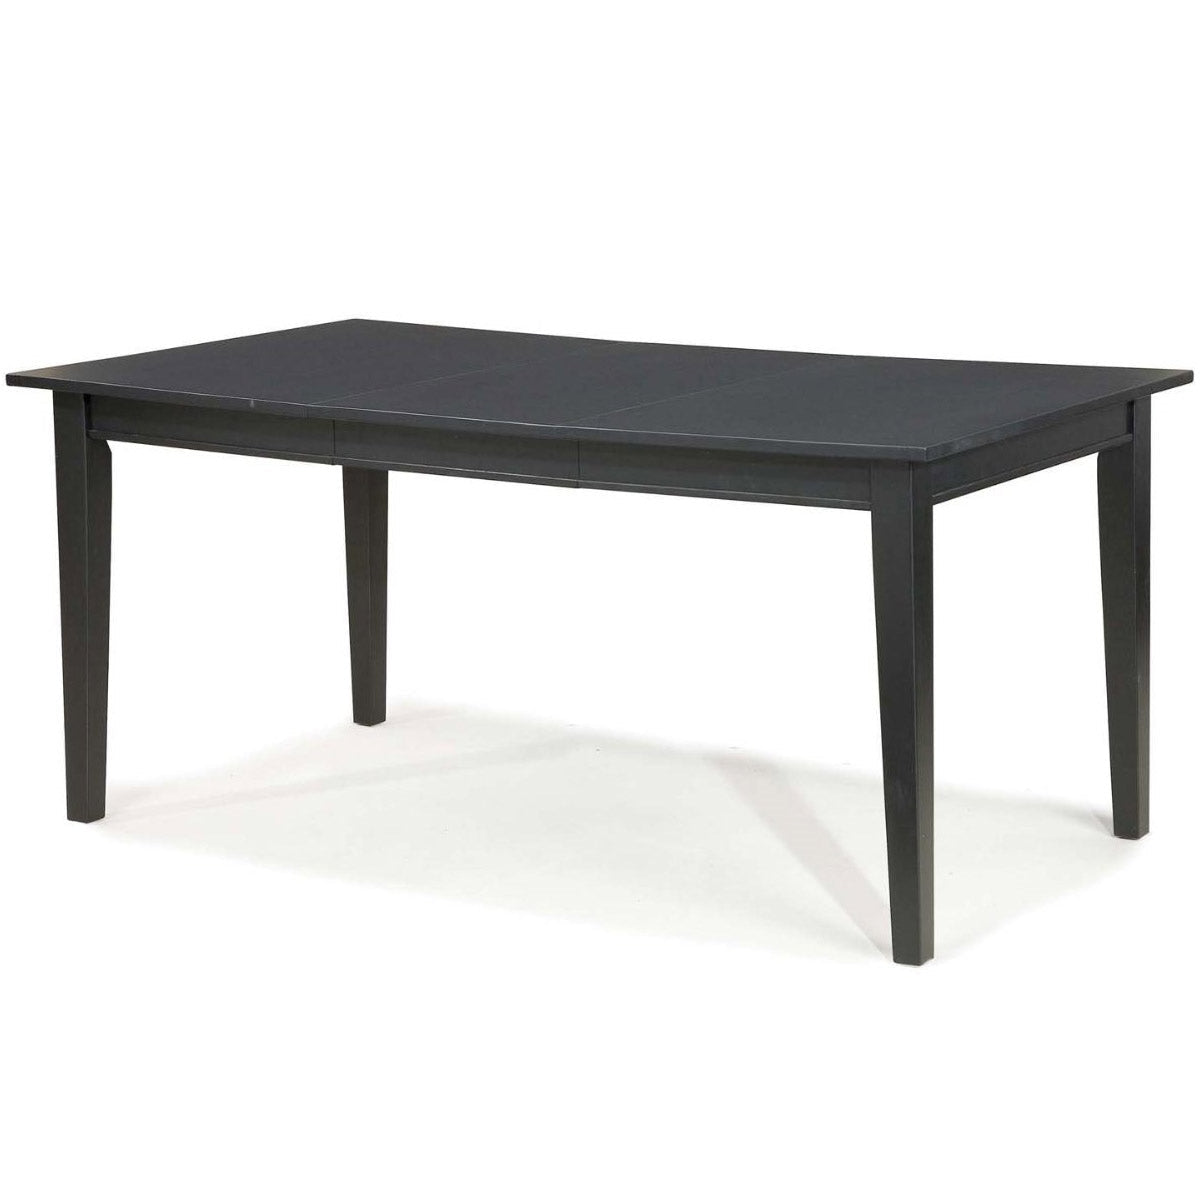 Dining > Dining Tables - Space Saving Expandable Dining Table 48-66-inch In Ebony Black Wood Finish